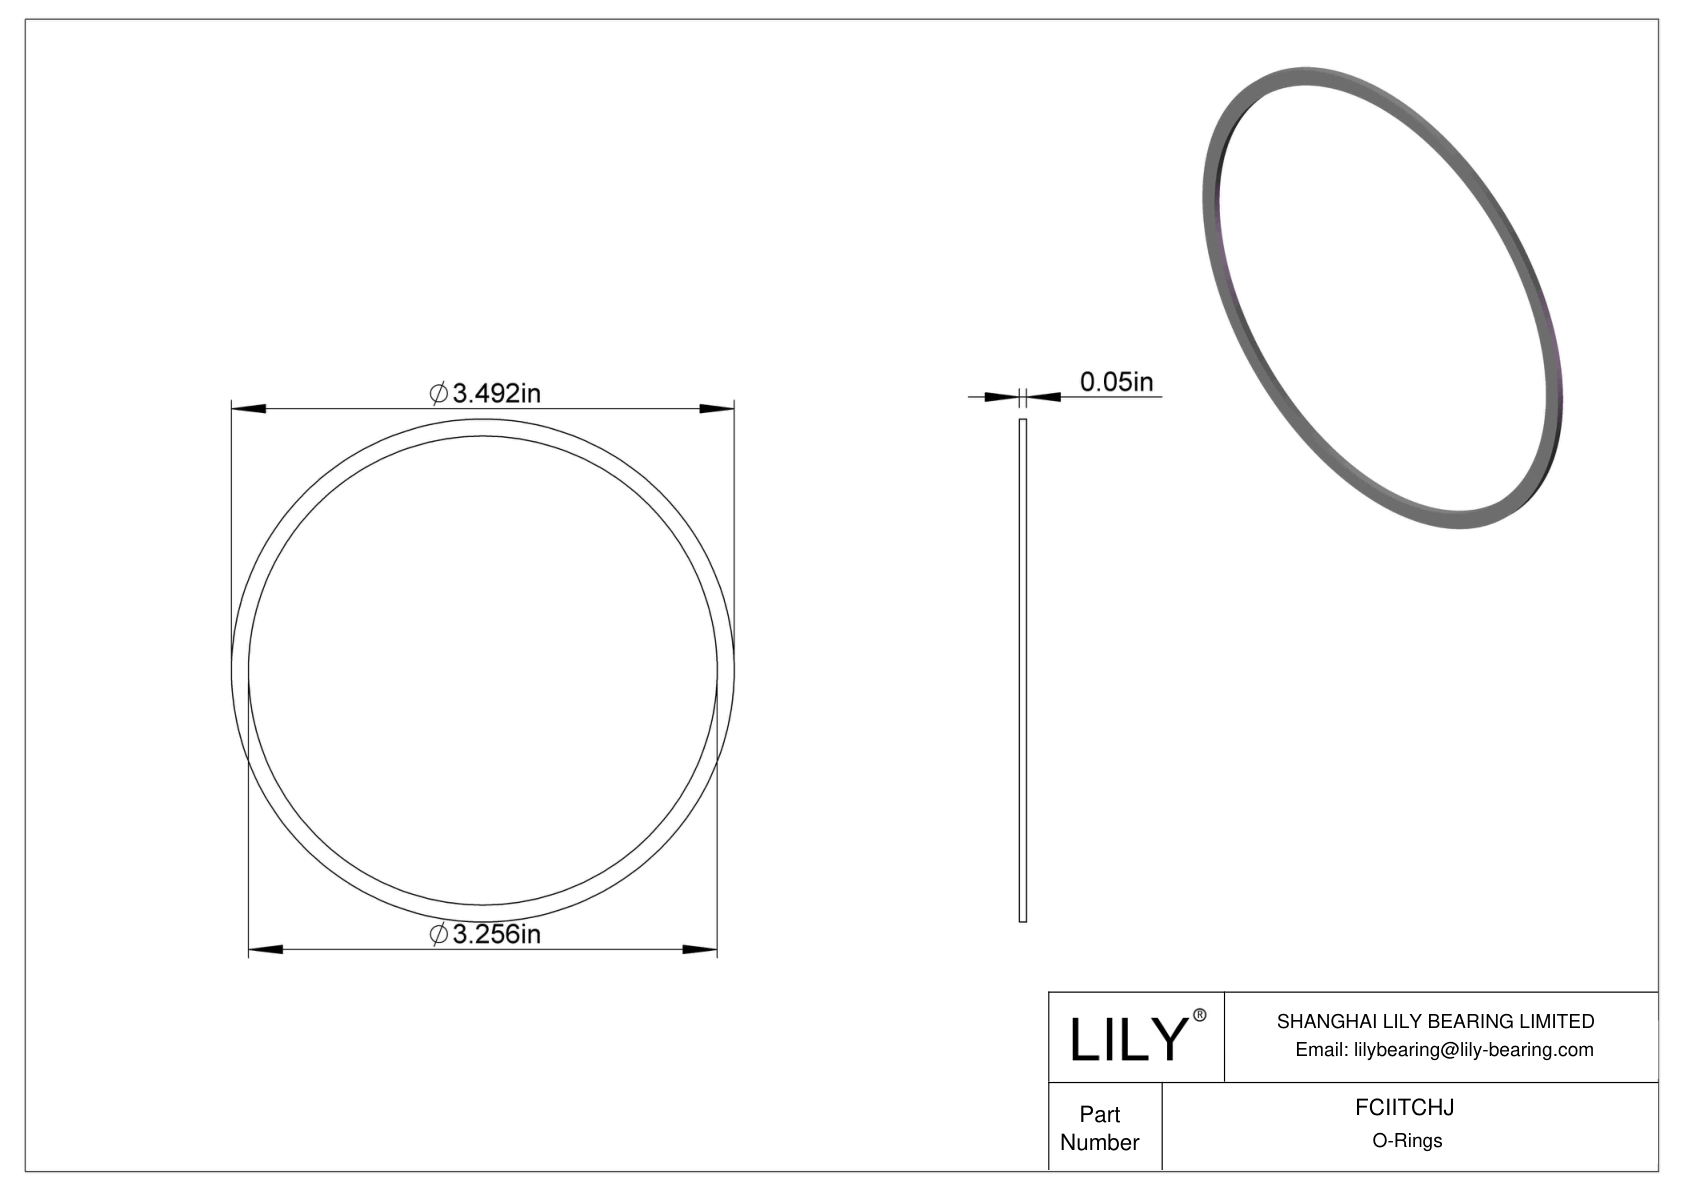 FCIITCHJ O-Ring Backup Rings cad drawing